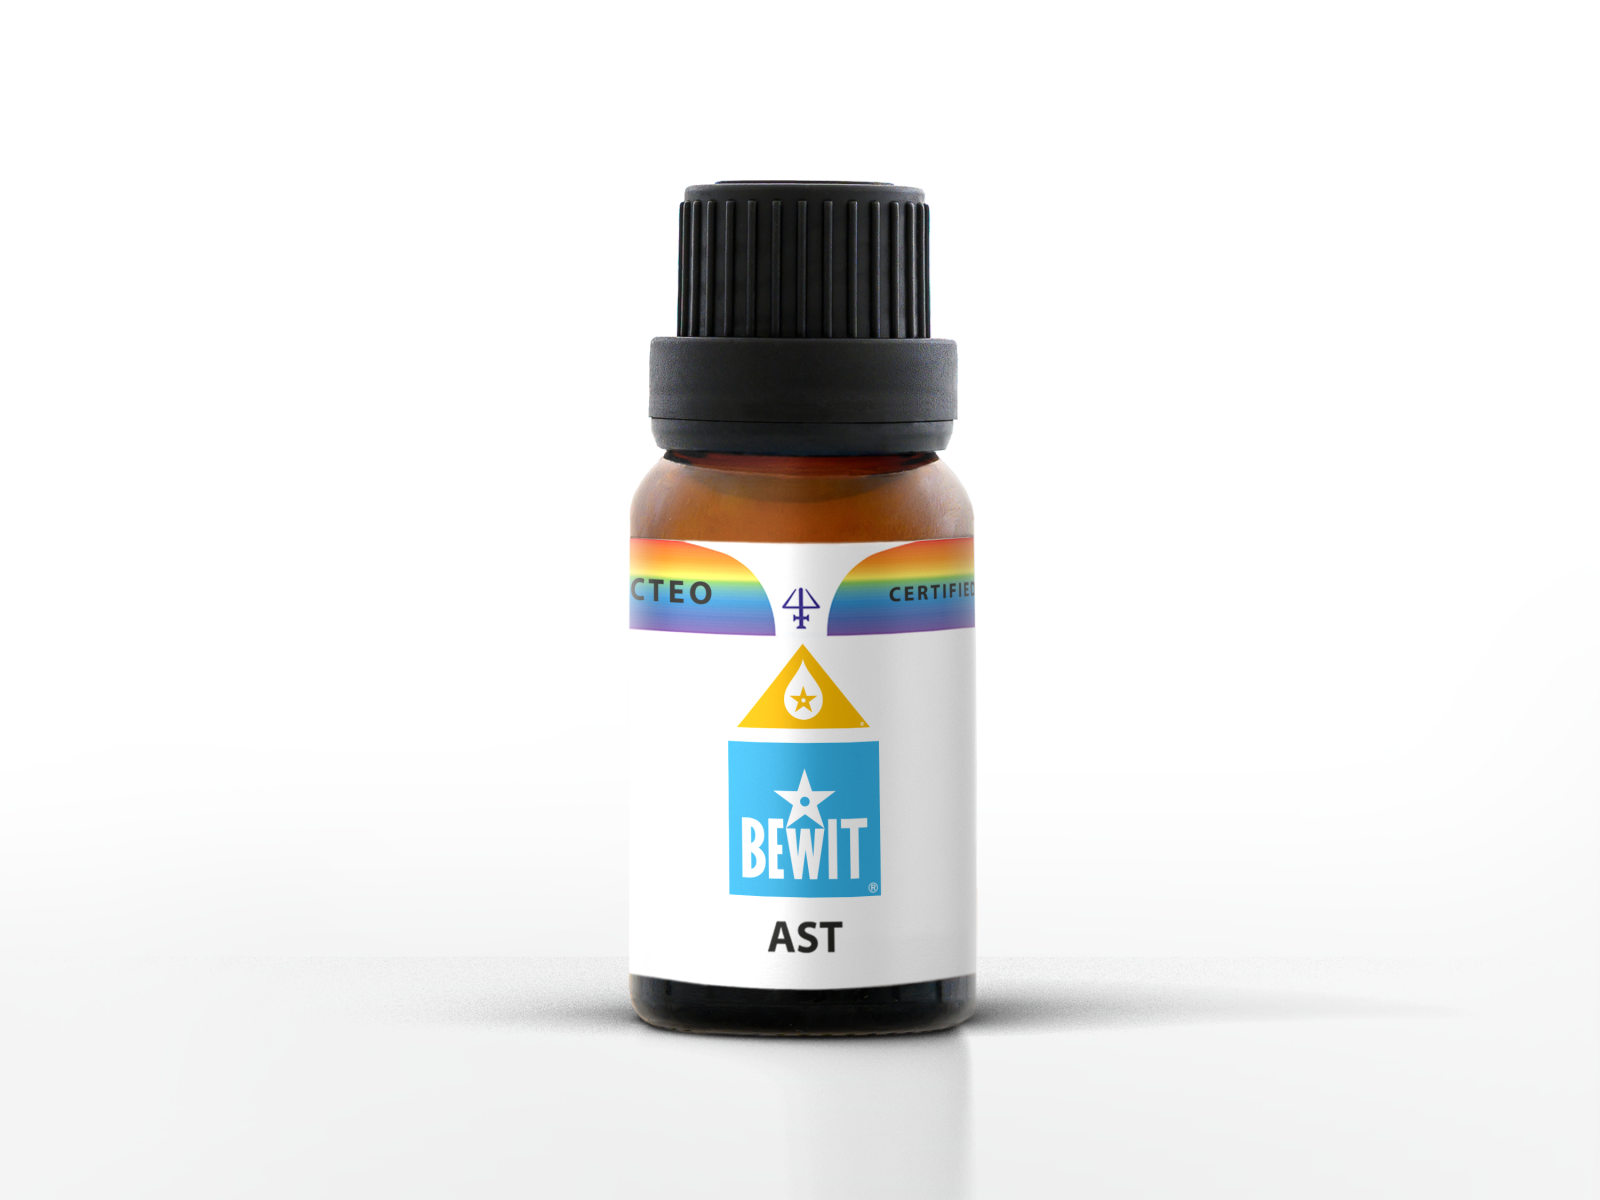 BEWIT AST - Blend of essential oils - 1